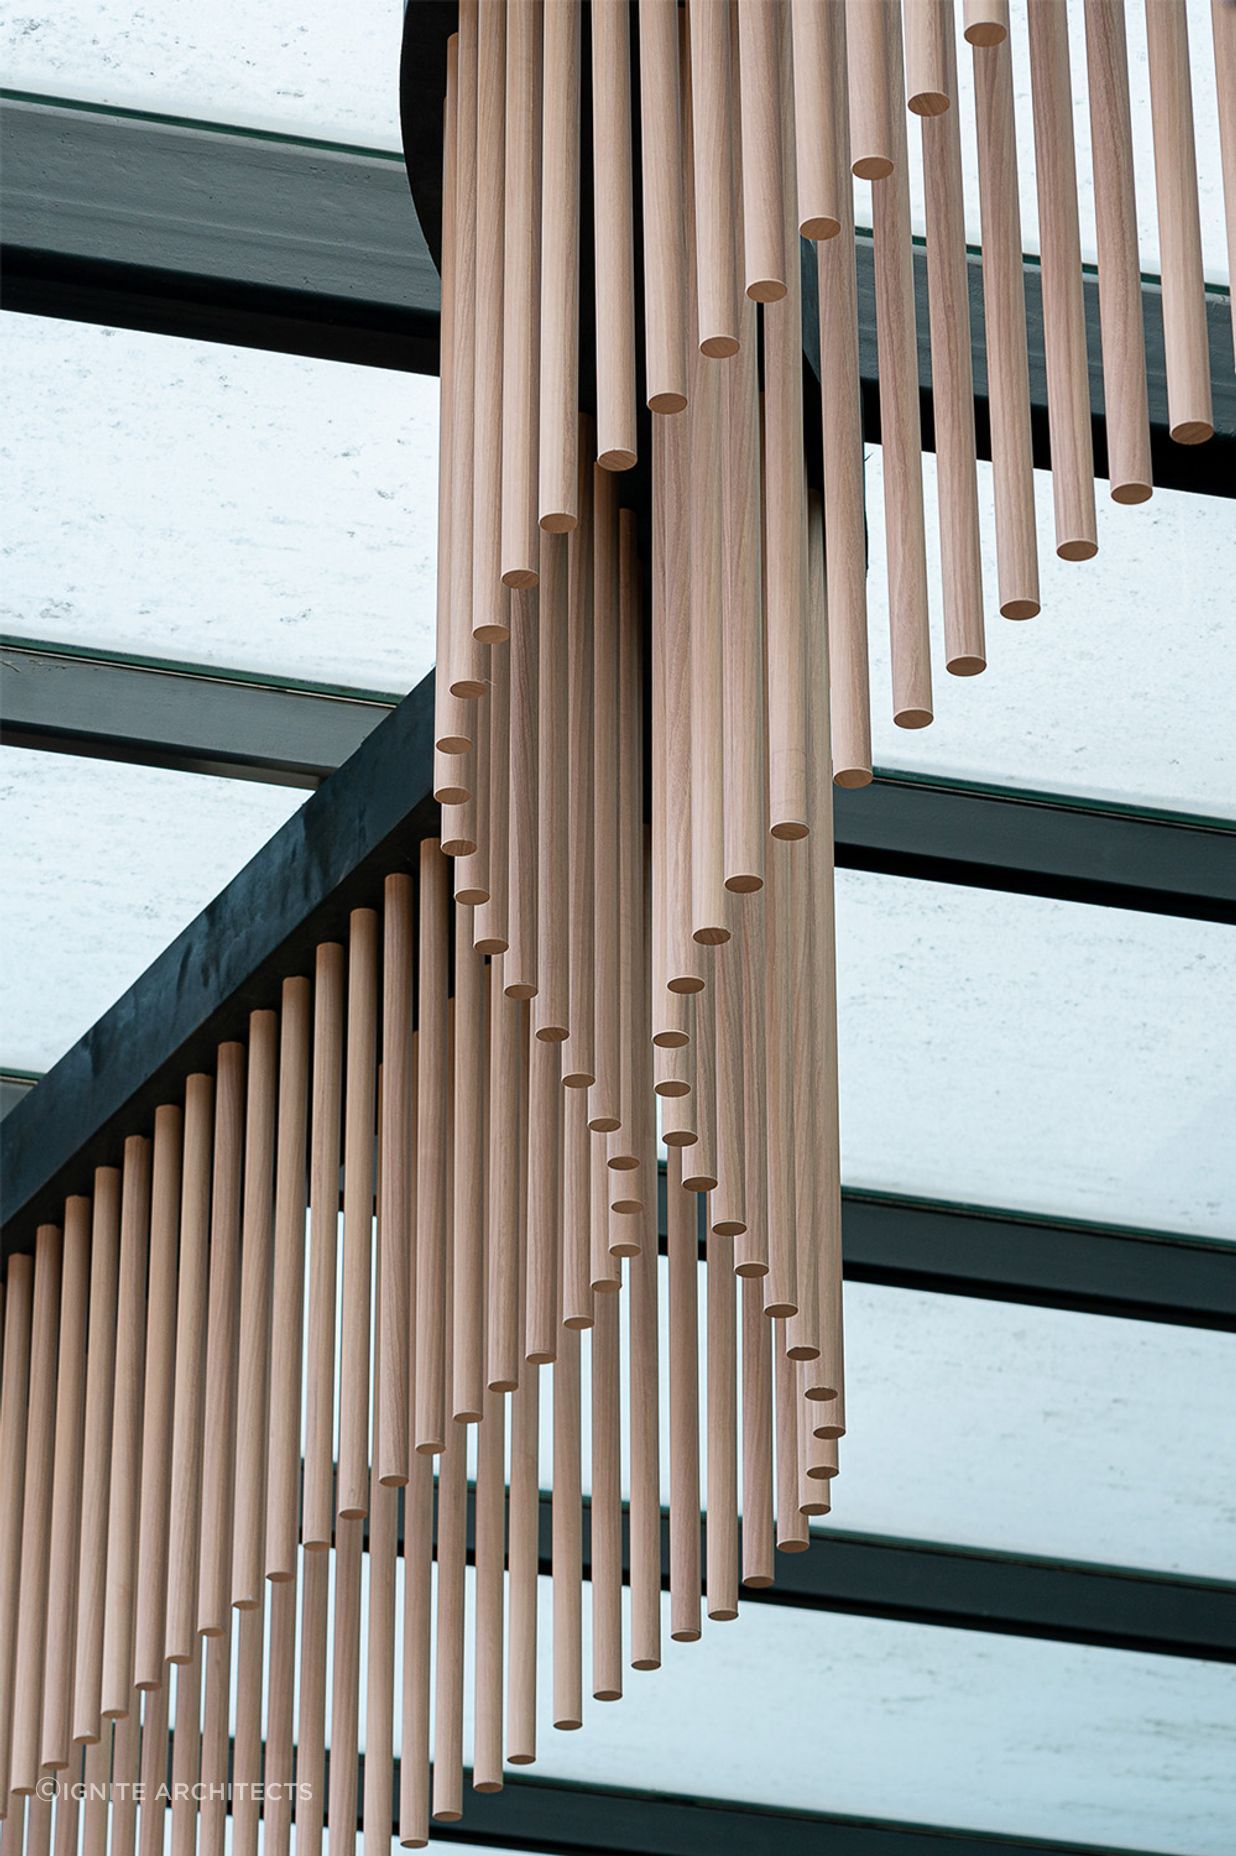 Wave-like timber battens on the building's façade